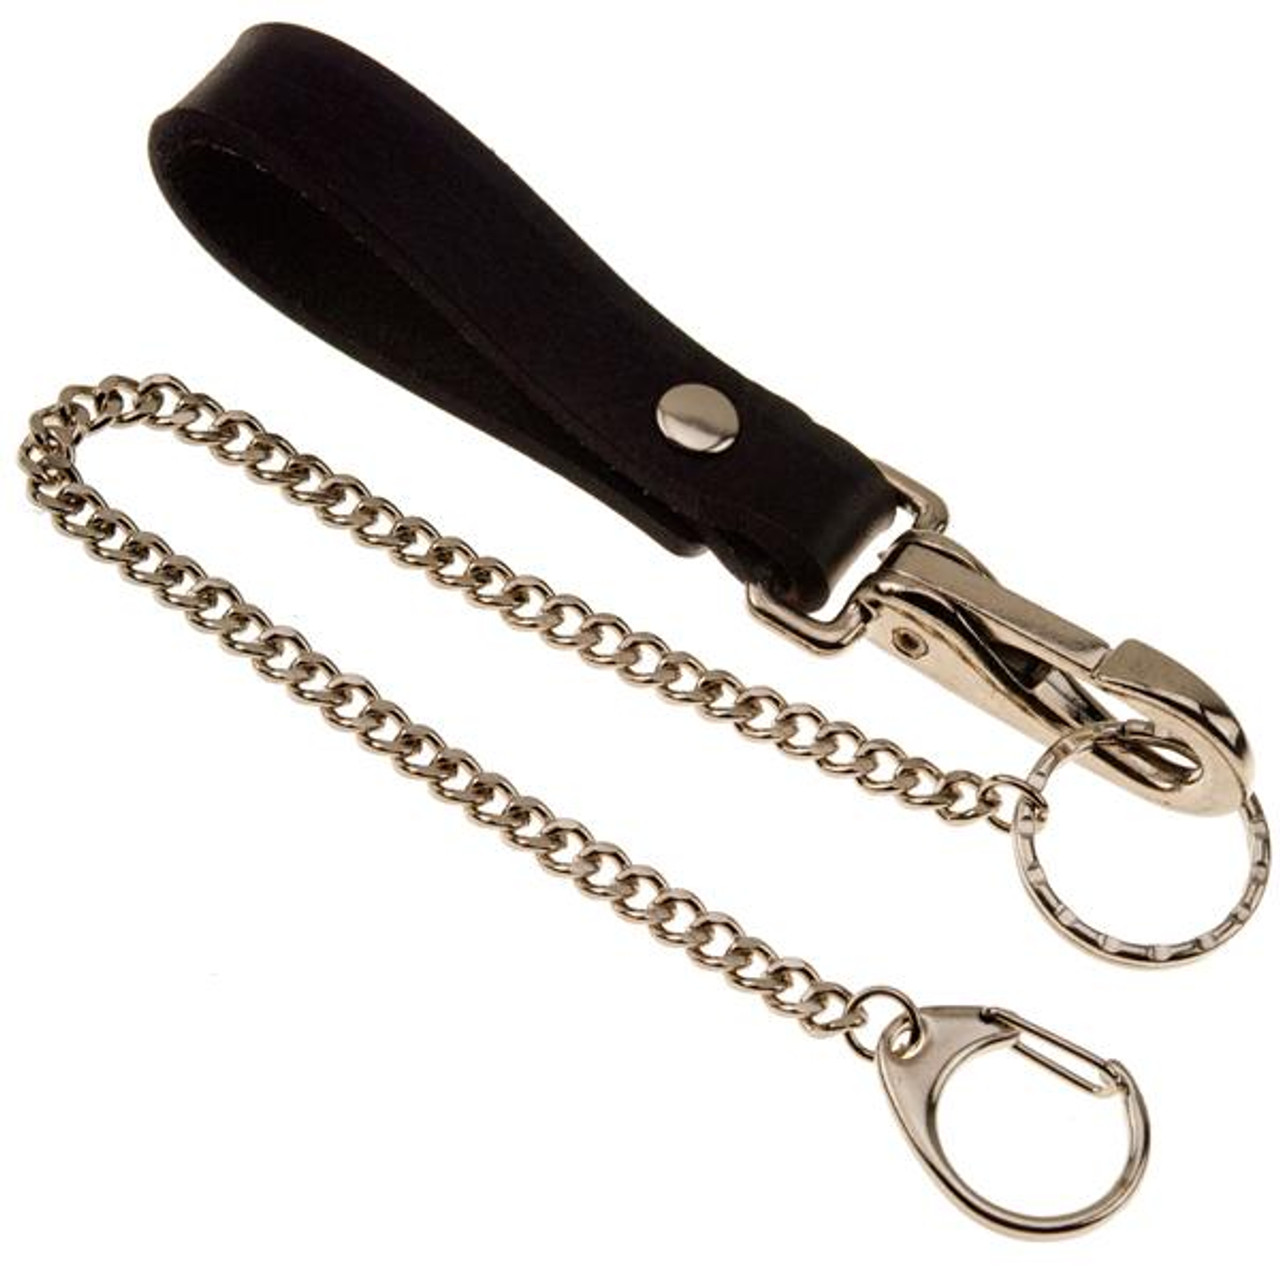  leather belt keepers for duty belt with solid brass  buckle,leather belt lookp keychain key holder for men and women (Coffee) :  Handmade Products